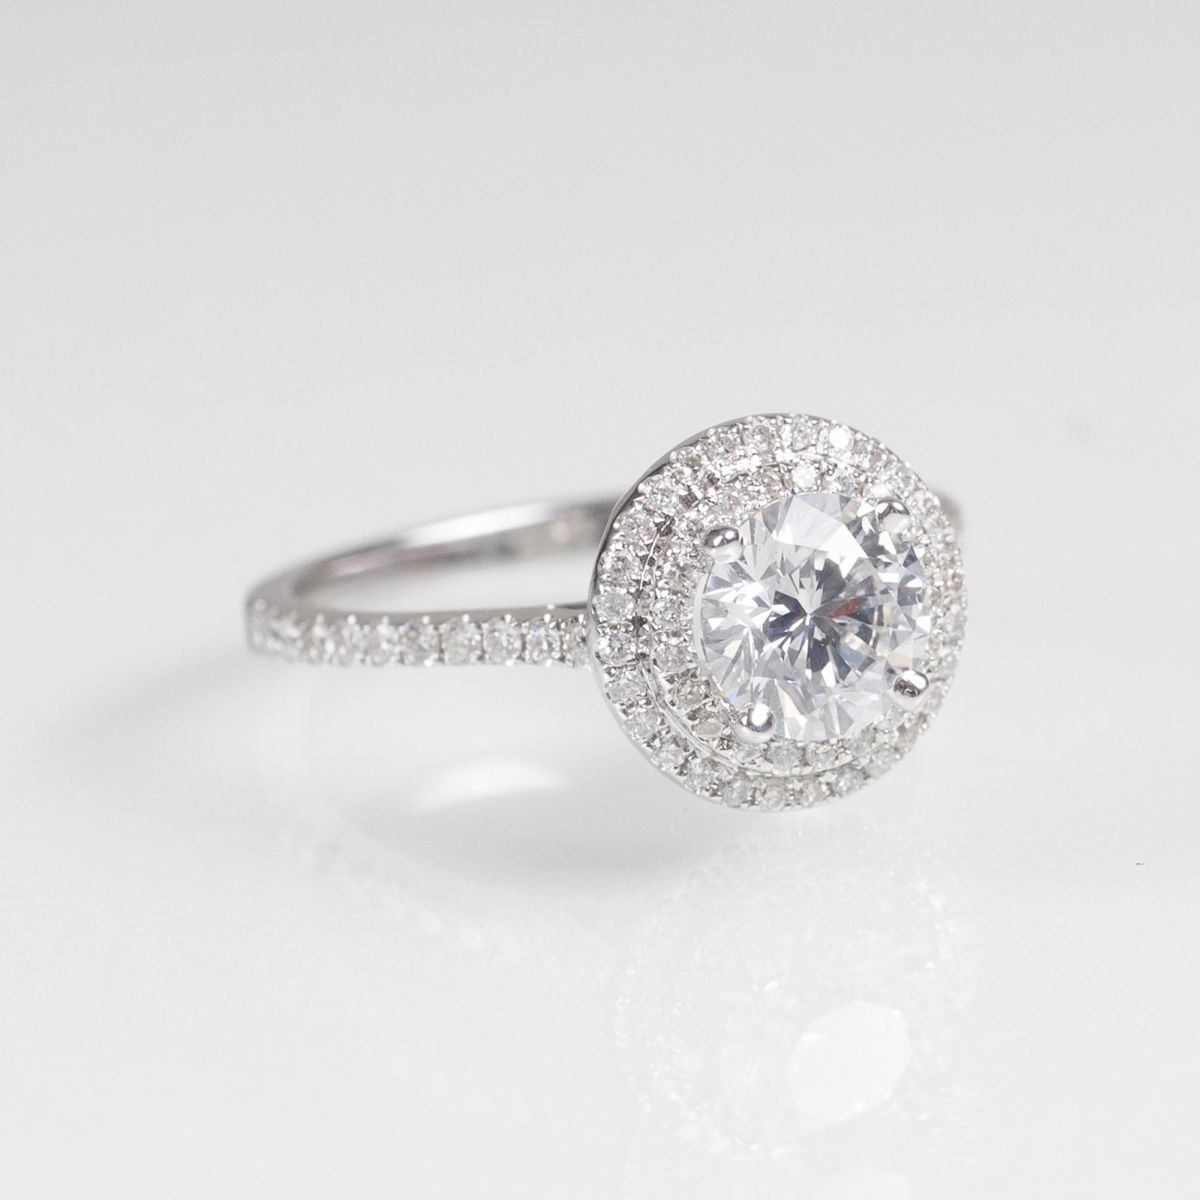 A Classical Solitaire Diamond Ring - image 2